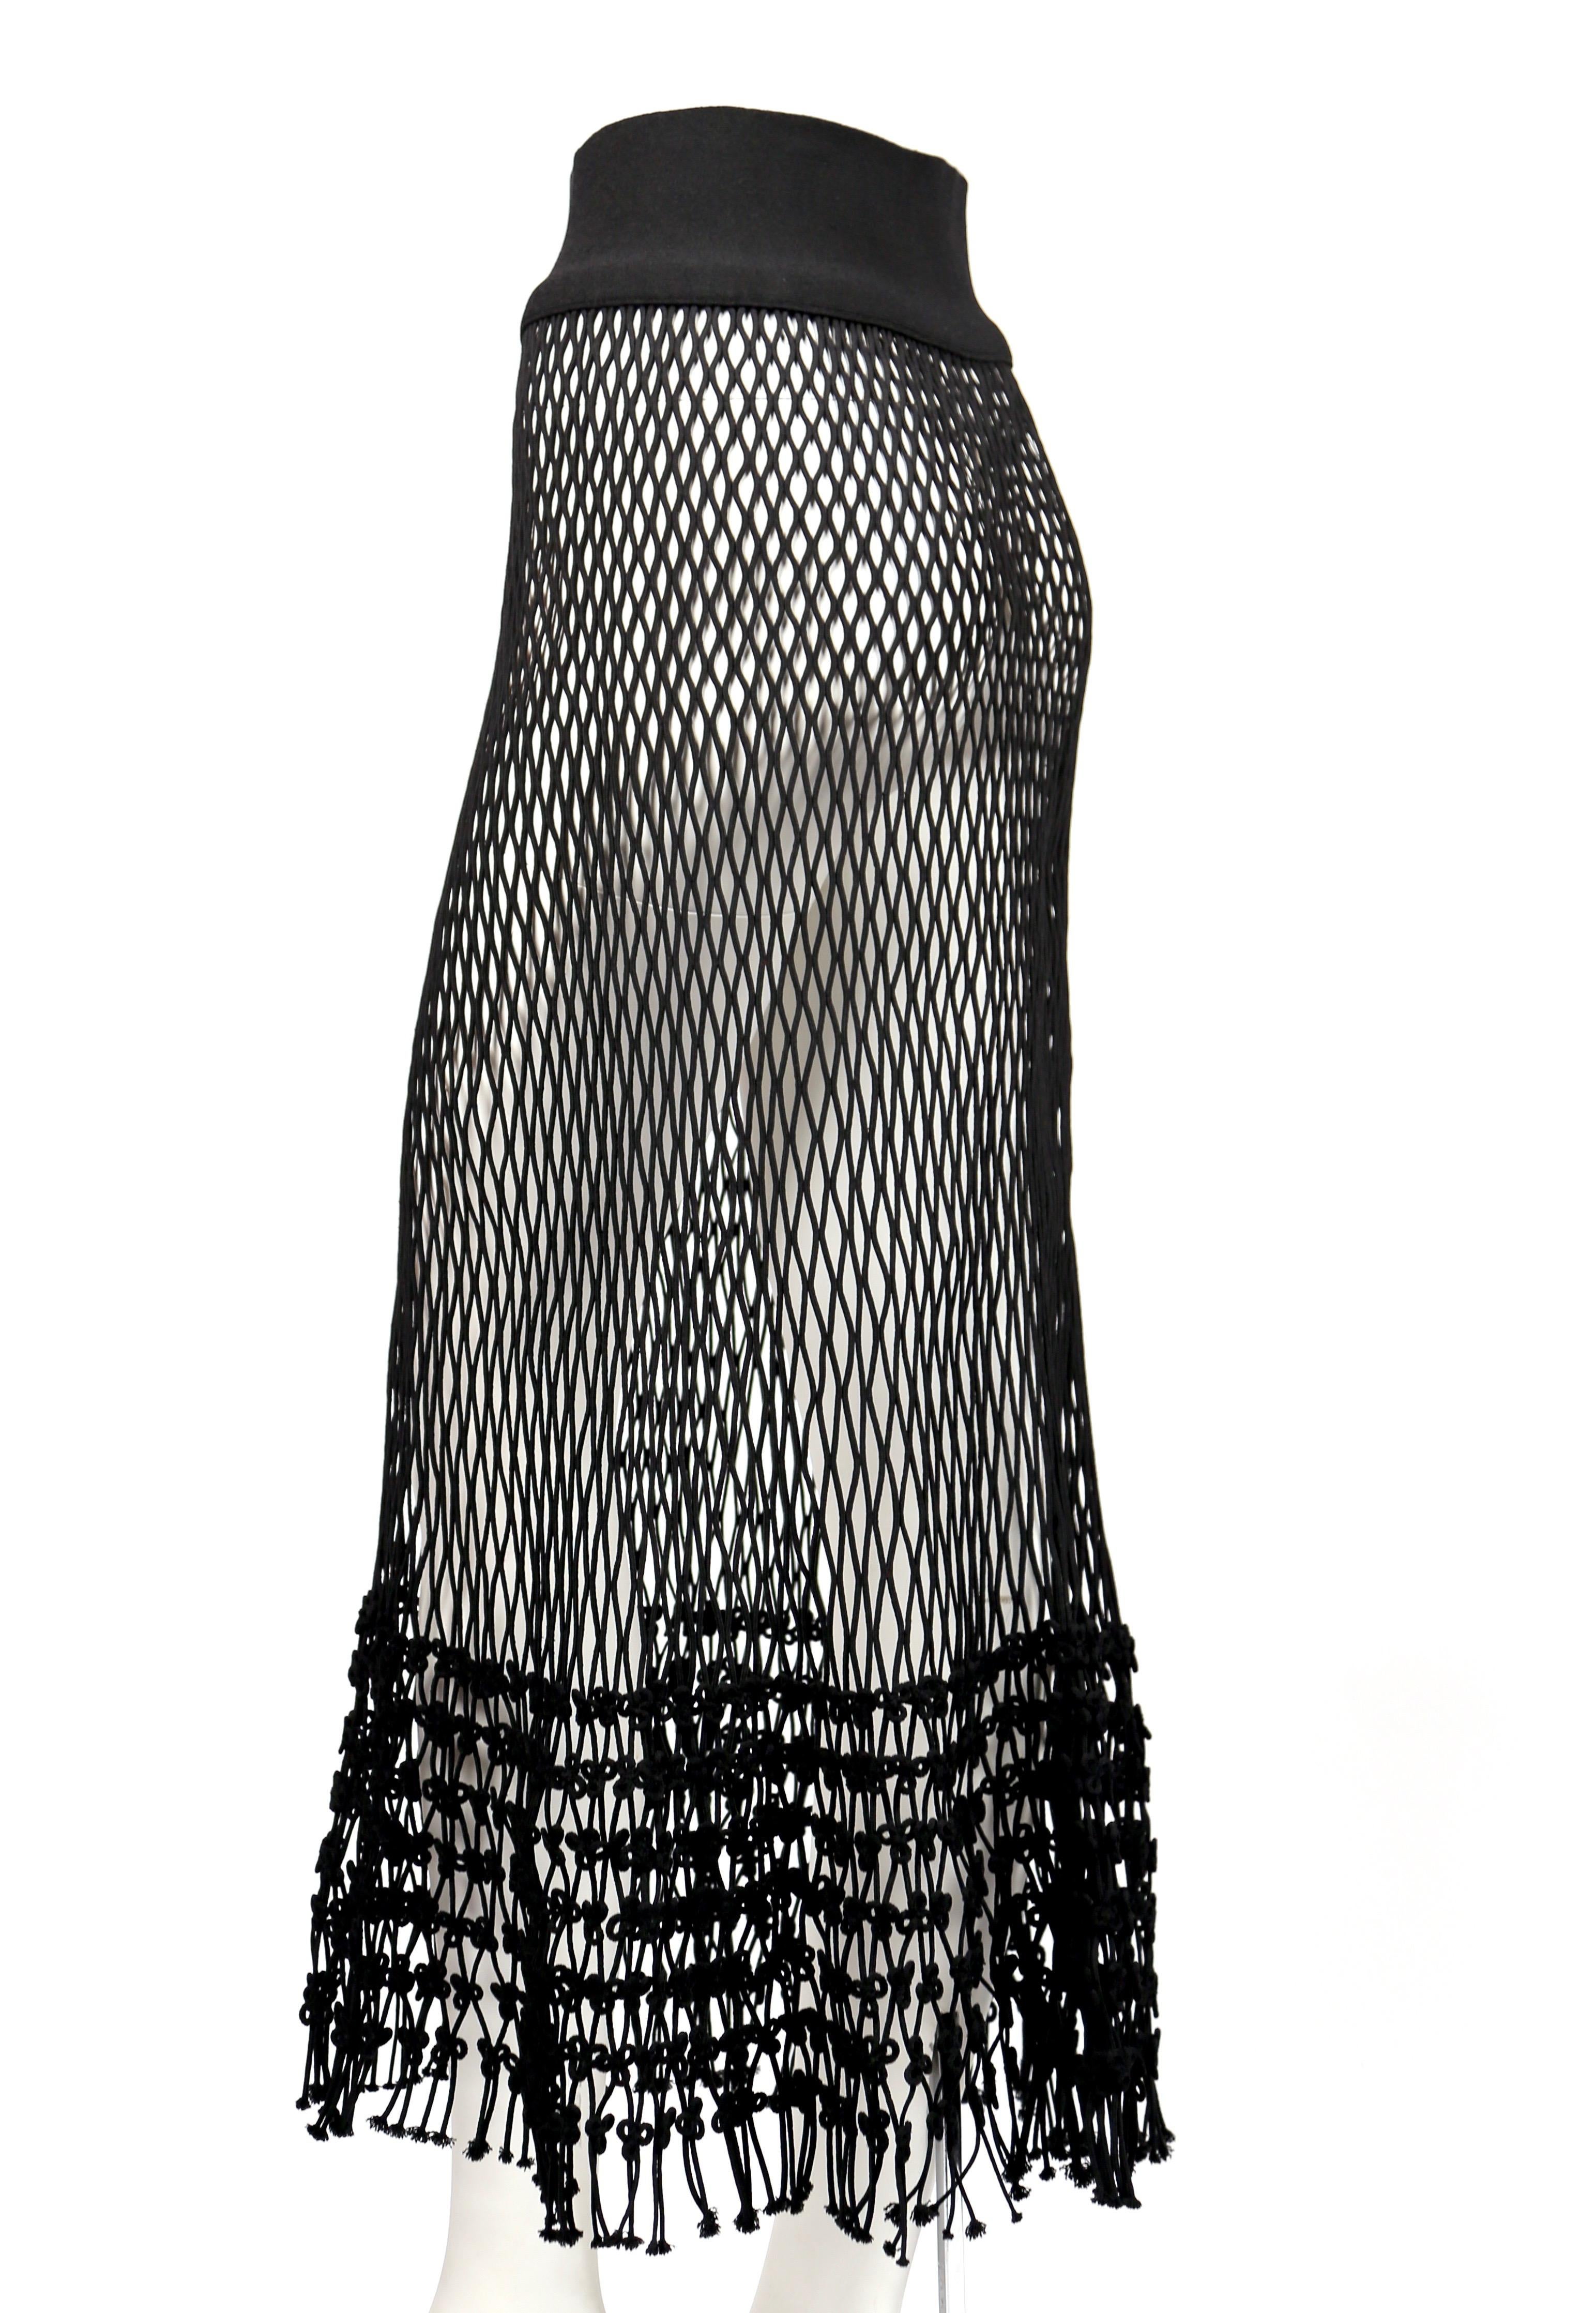 2014 CELINE by PHOEBE PHILO black net runway skirt - new In New Condition In San Fransisco, CA